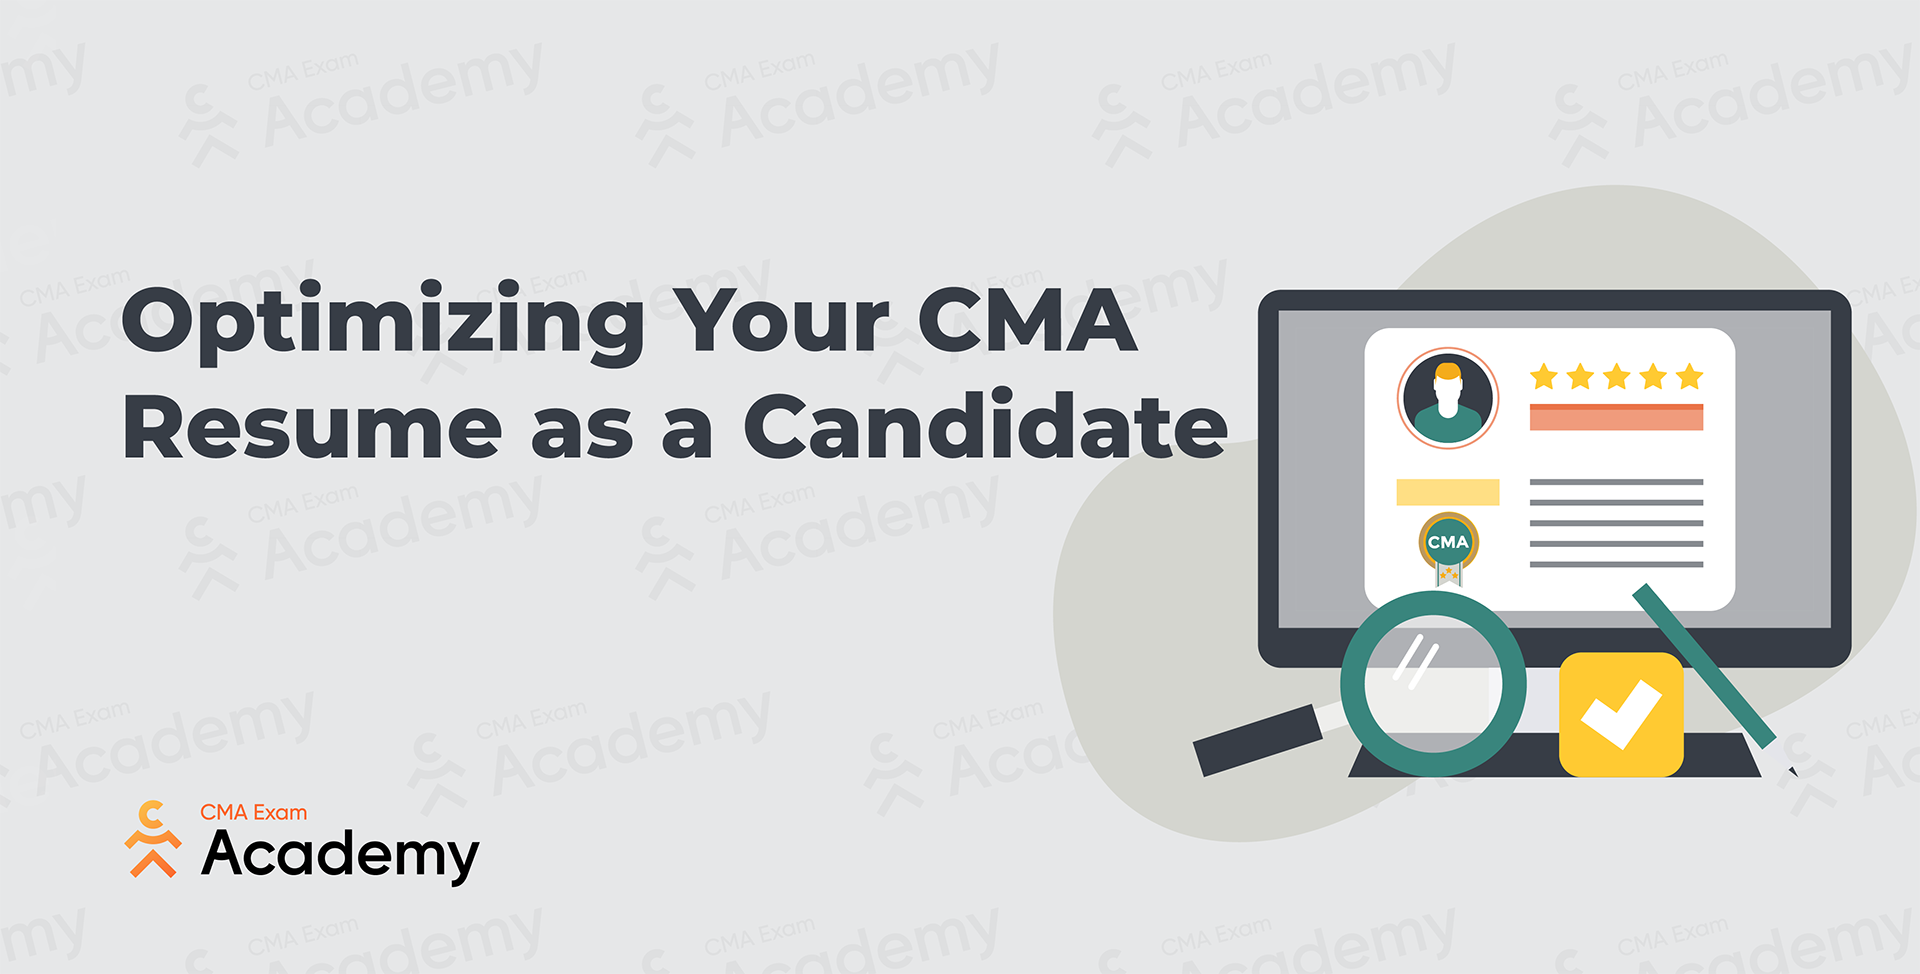 Image - Optimizing Your CMA Resume as a Candidate